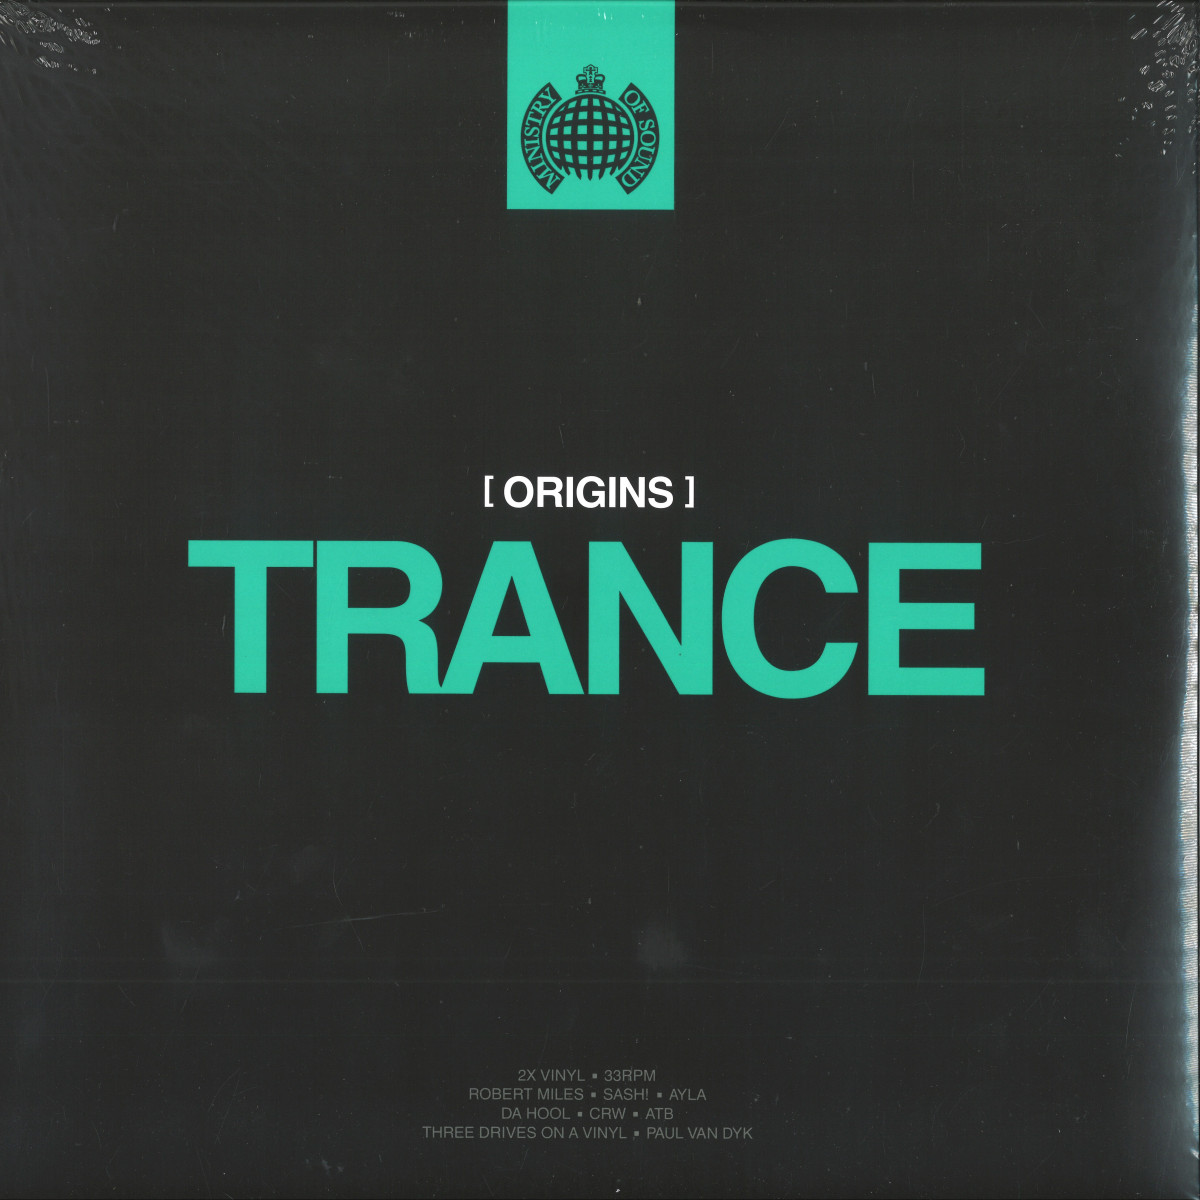 VARIOUS ARTISTS - MINISTRY OF SOUND - ORIGINS OF TRANCE / Ministry of Sound  UK MOSLP541 - Vinyl